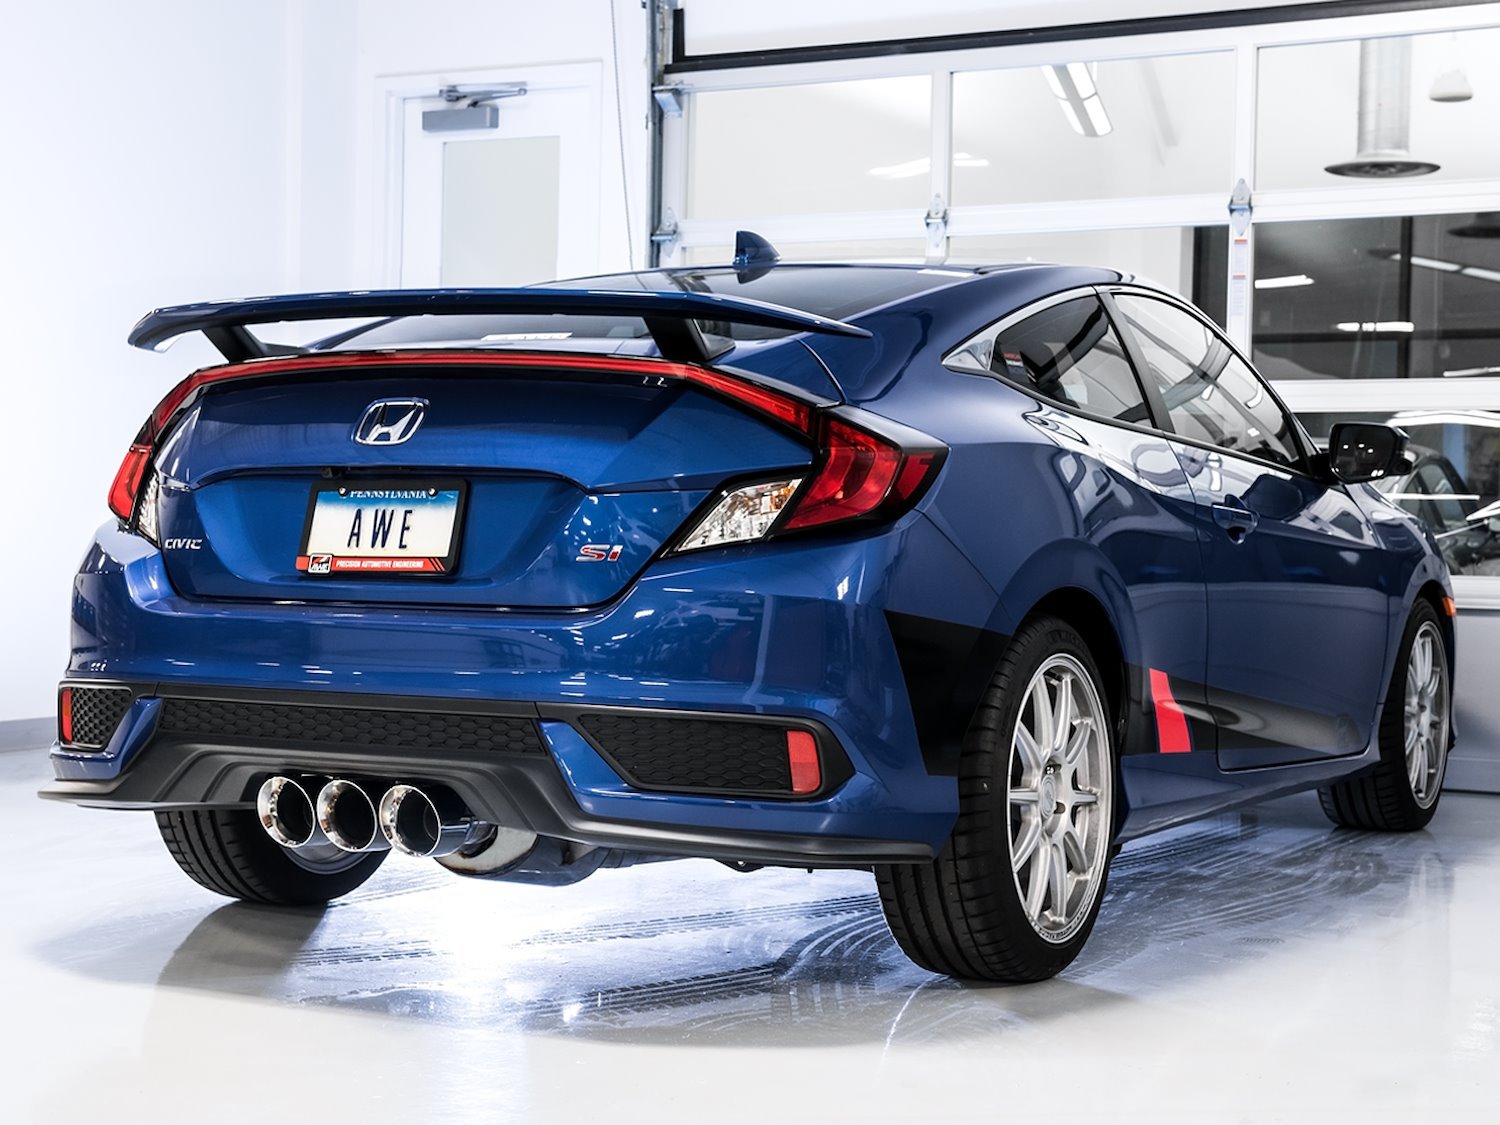 AWE Dual-to-Triple Tip Conversion for 10th Gen Civic Si - Chrome Silver Tip (AWE Exhaust required)